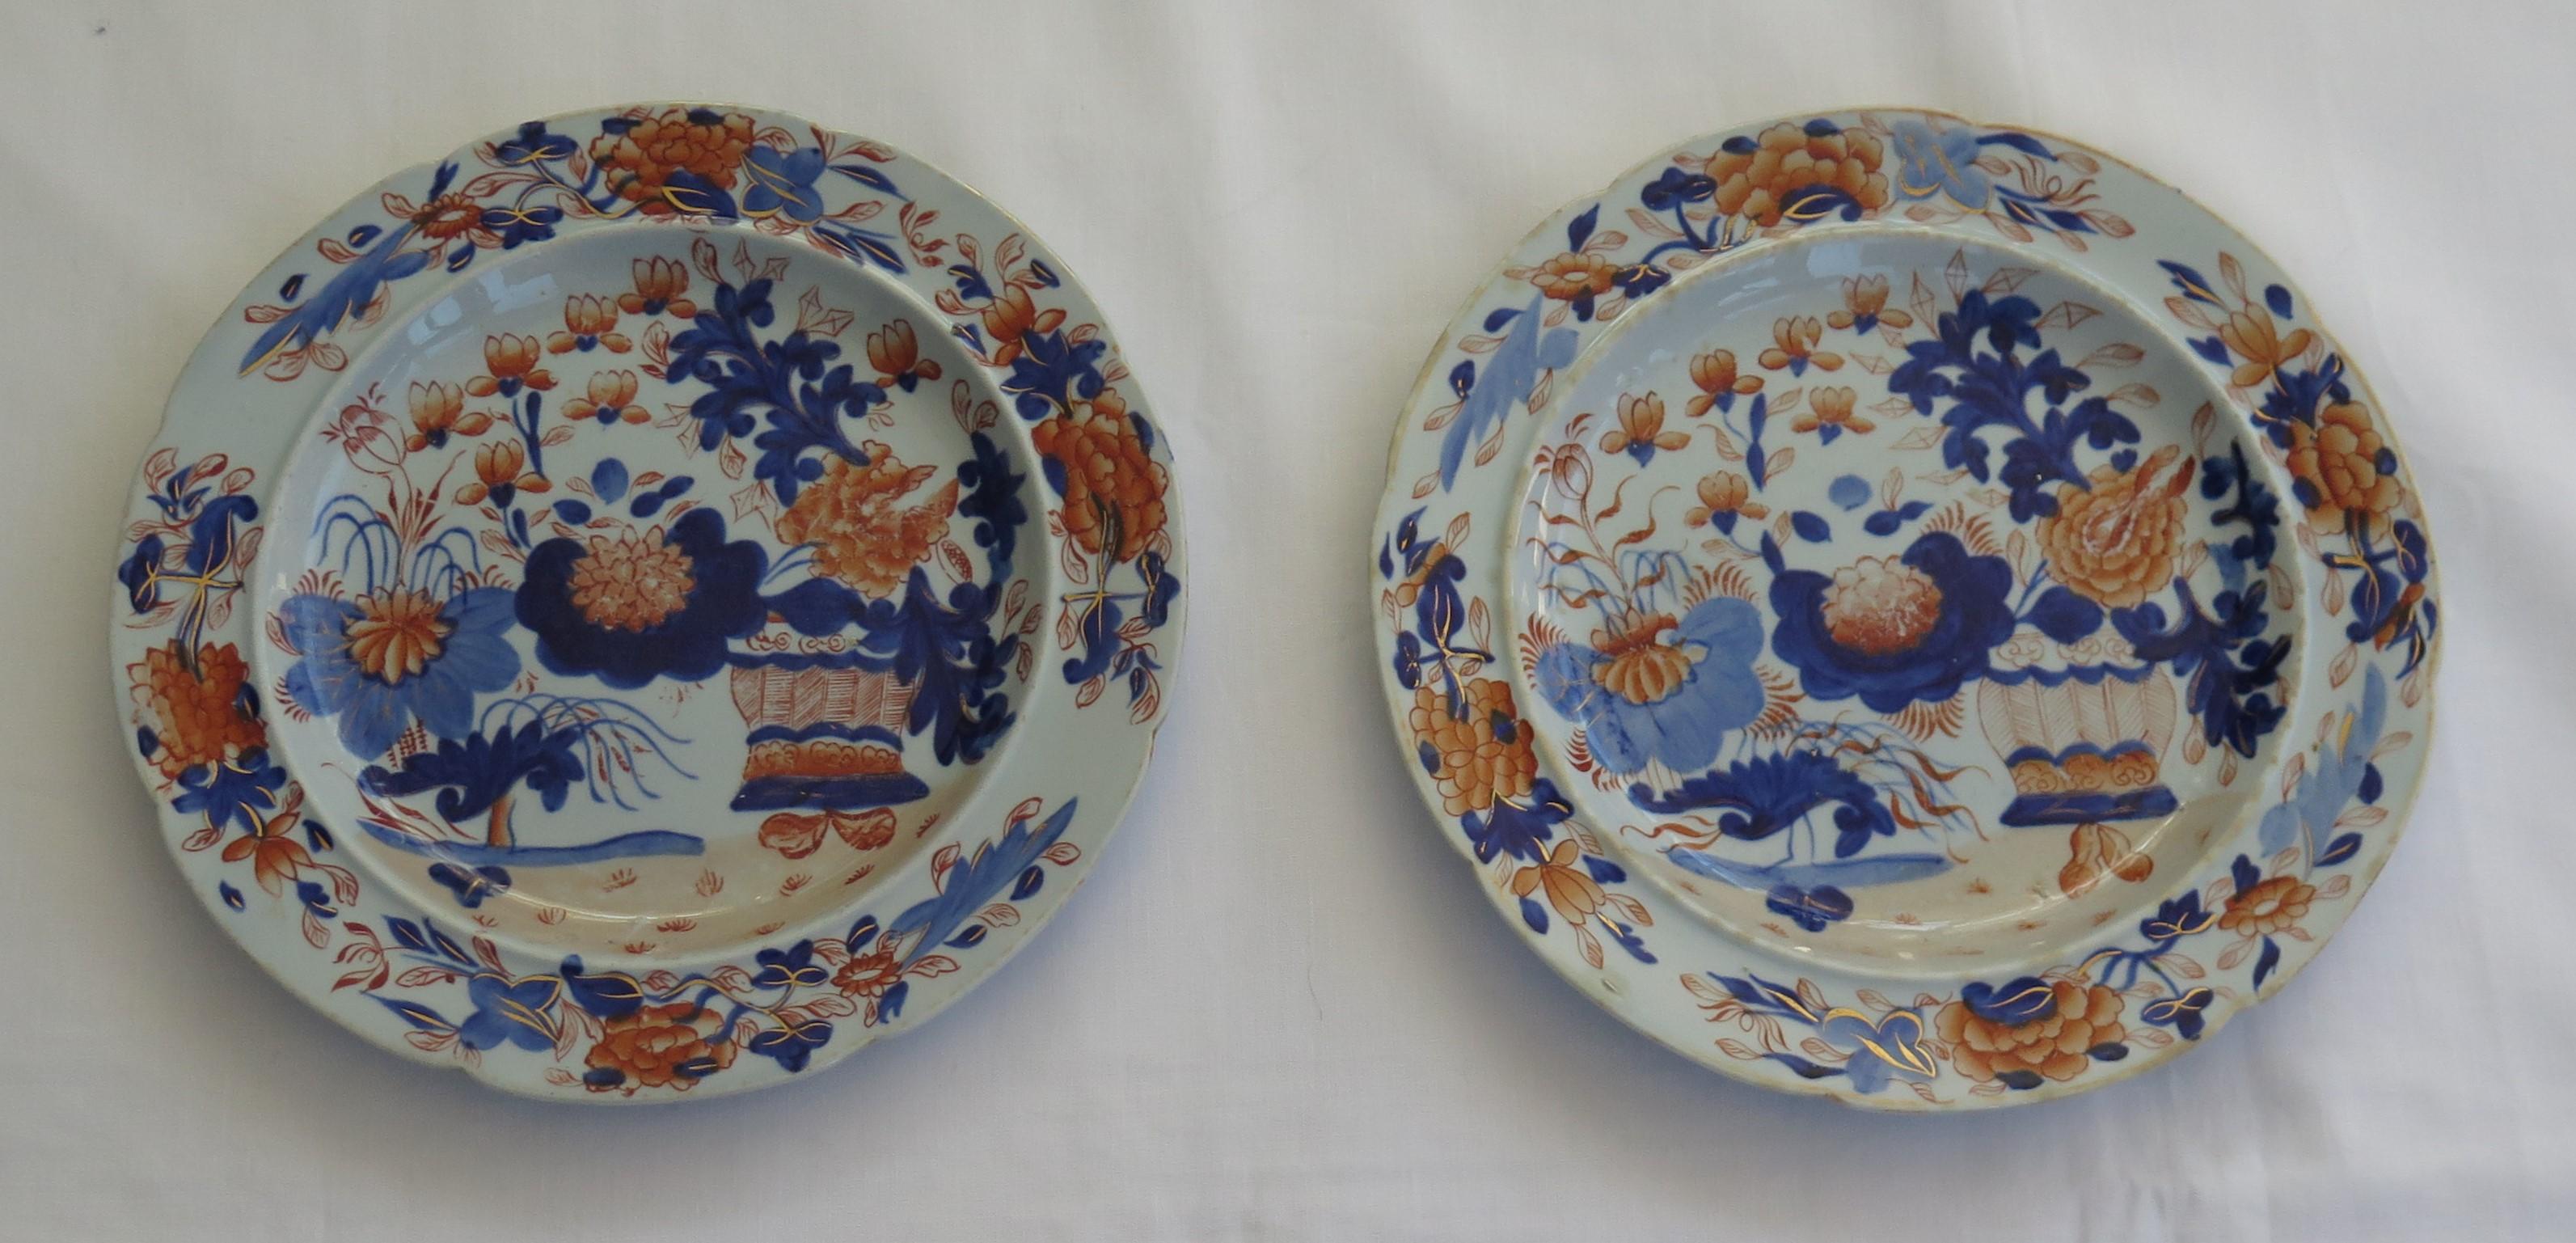 This is a good early pair of Mason's Ironstone pottery side plates, hand painted in the very decorative gilded basket Japan pattern, produced by the Mason's factory at Lane Delph, Staffordshire, England, in the George 111rd period, circa